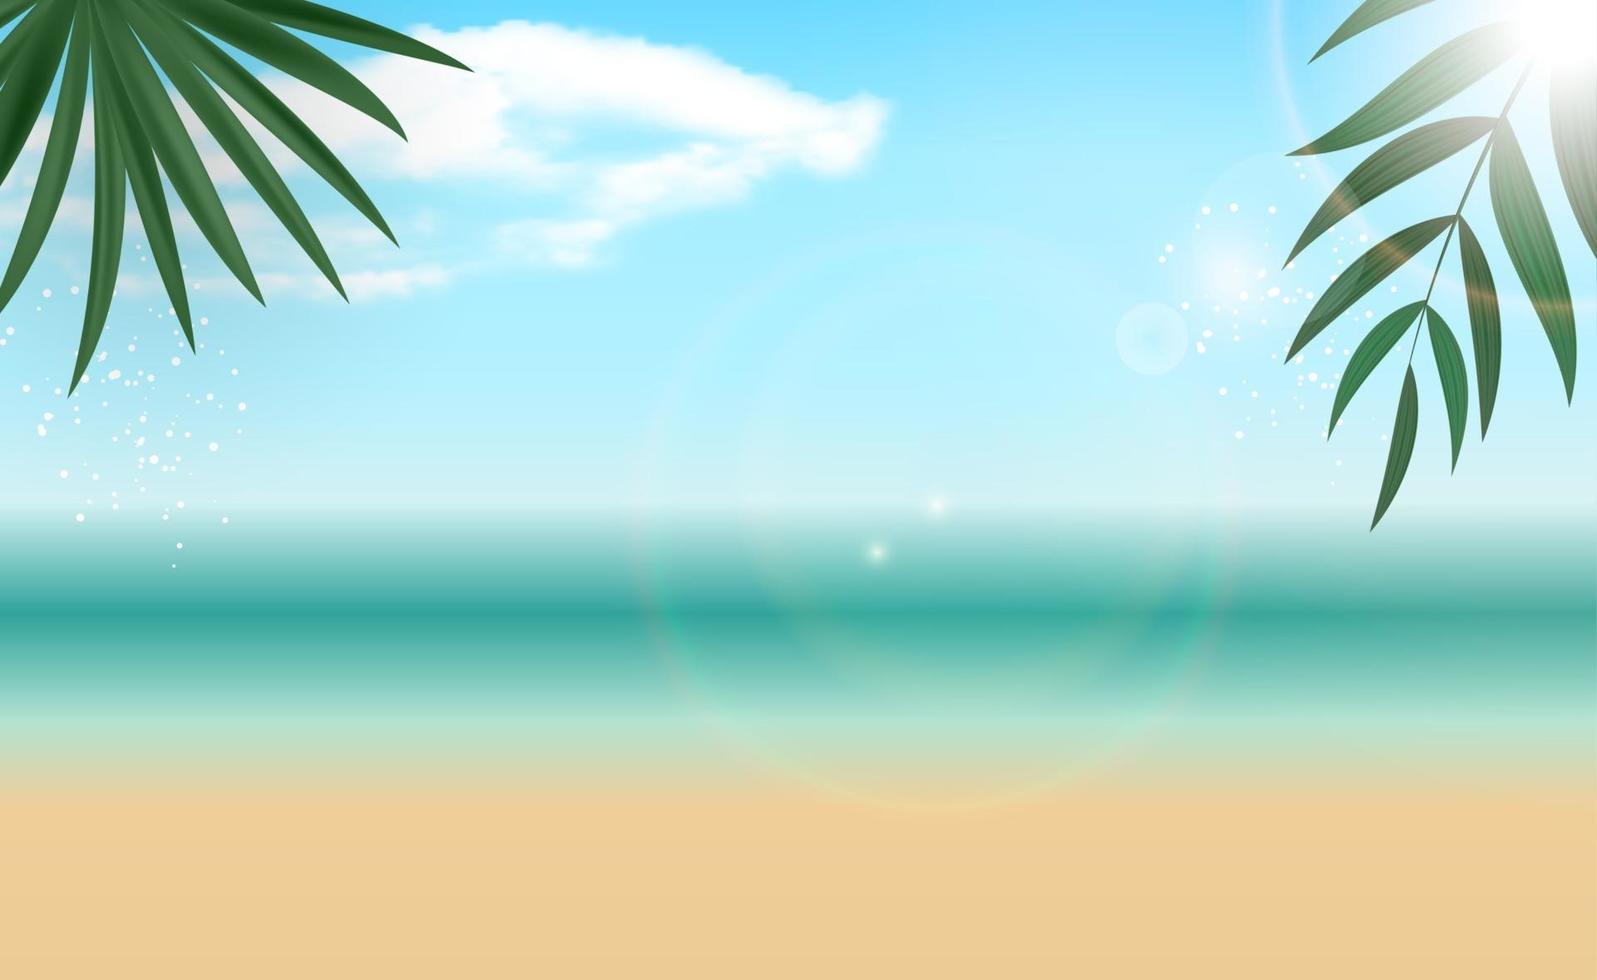 Natural Palm Summer Sea Background. Copy space vector illustration